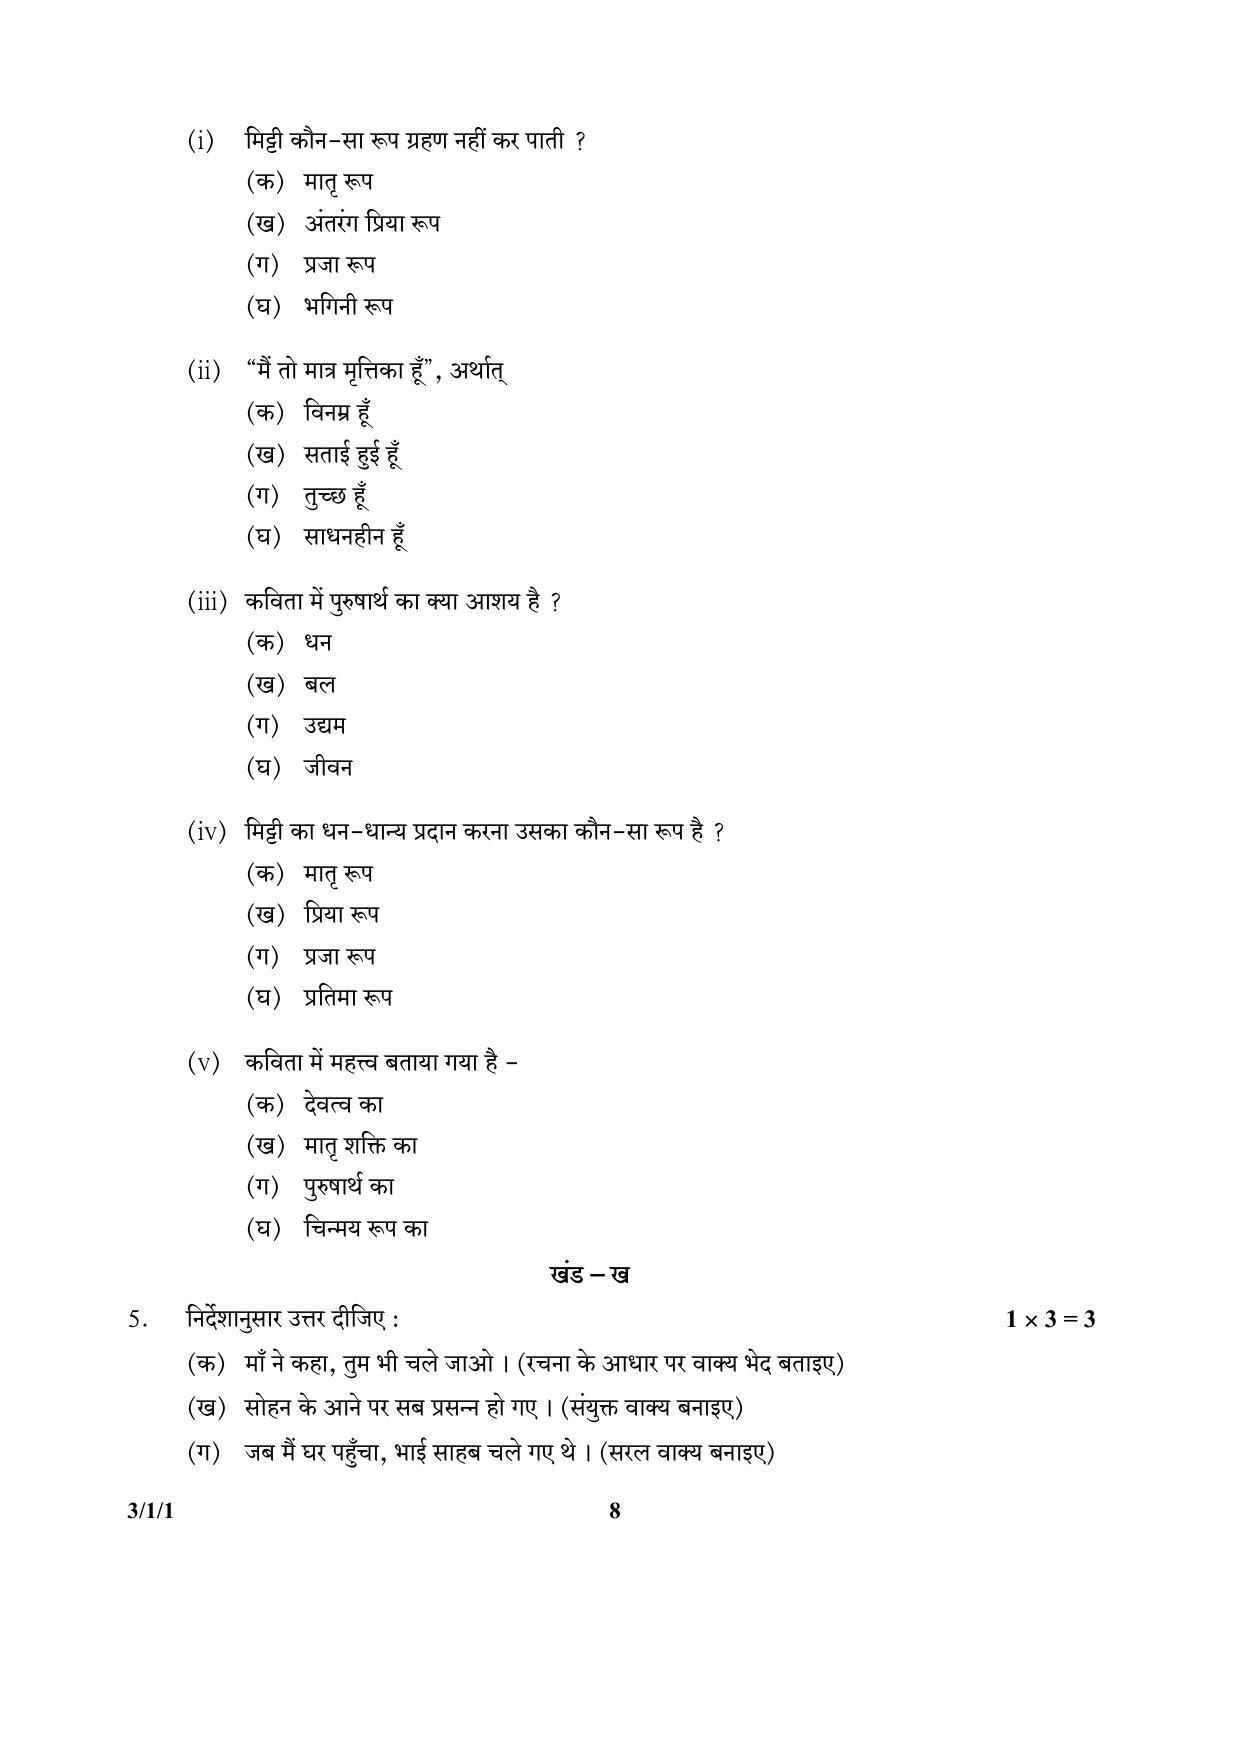 CBSE Class 10 3-1-1 (Hindi) 2017-comptt Question Paper - Page 8